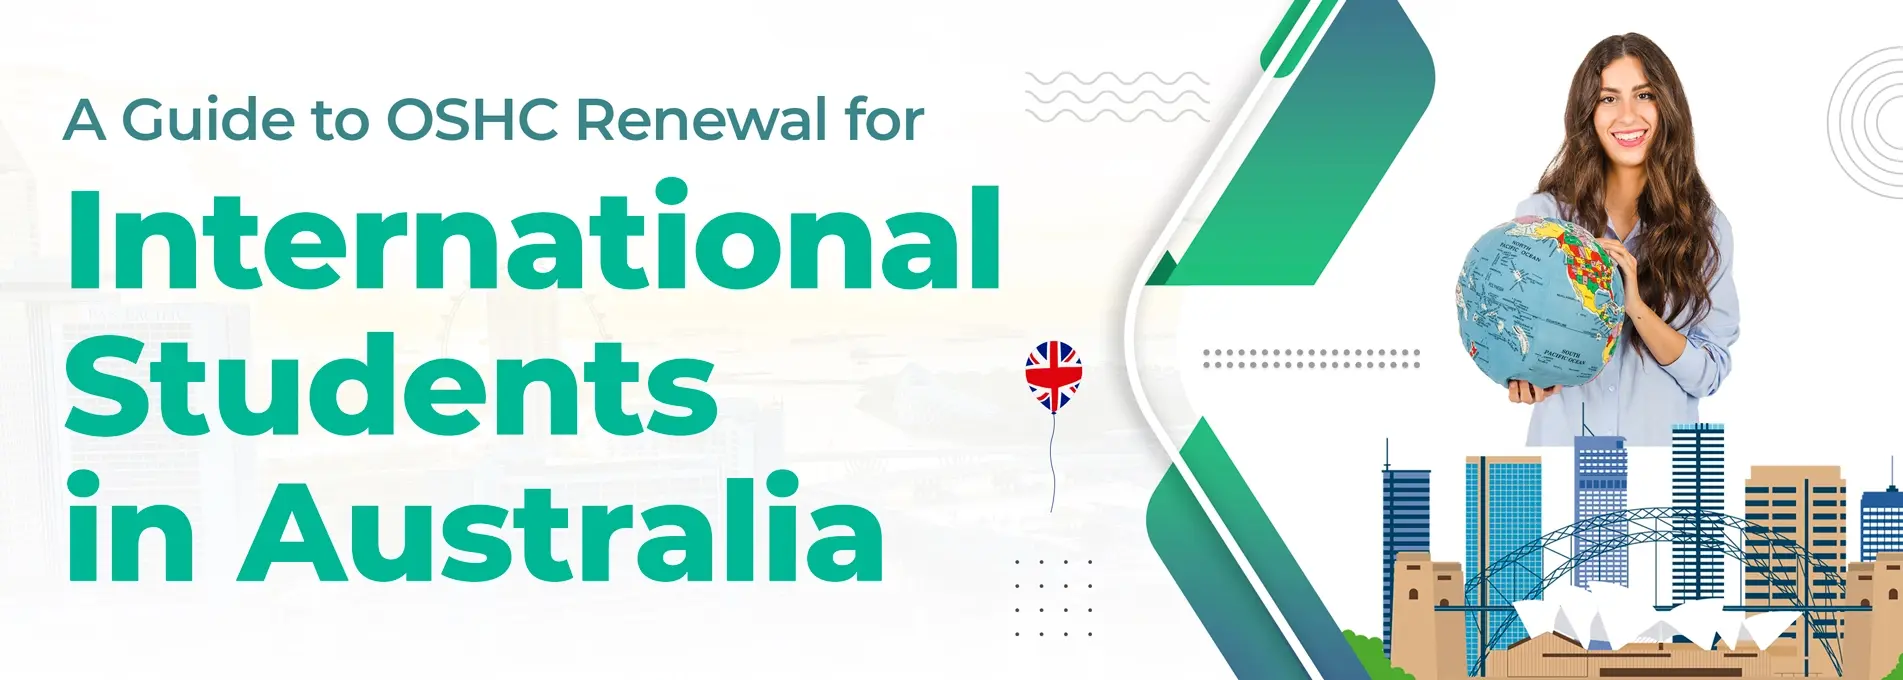 A Guide to OSHC Renewal for International Students in Australia